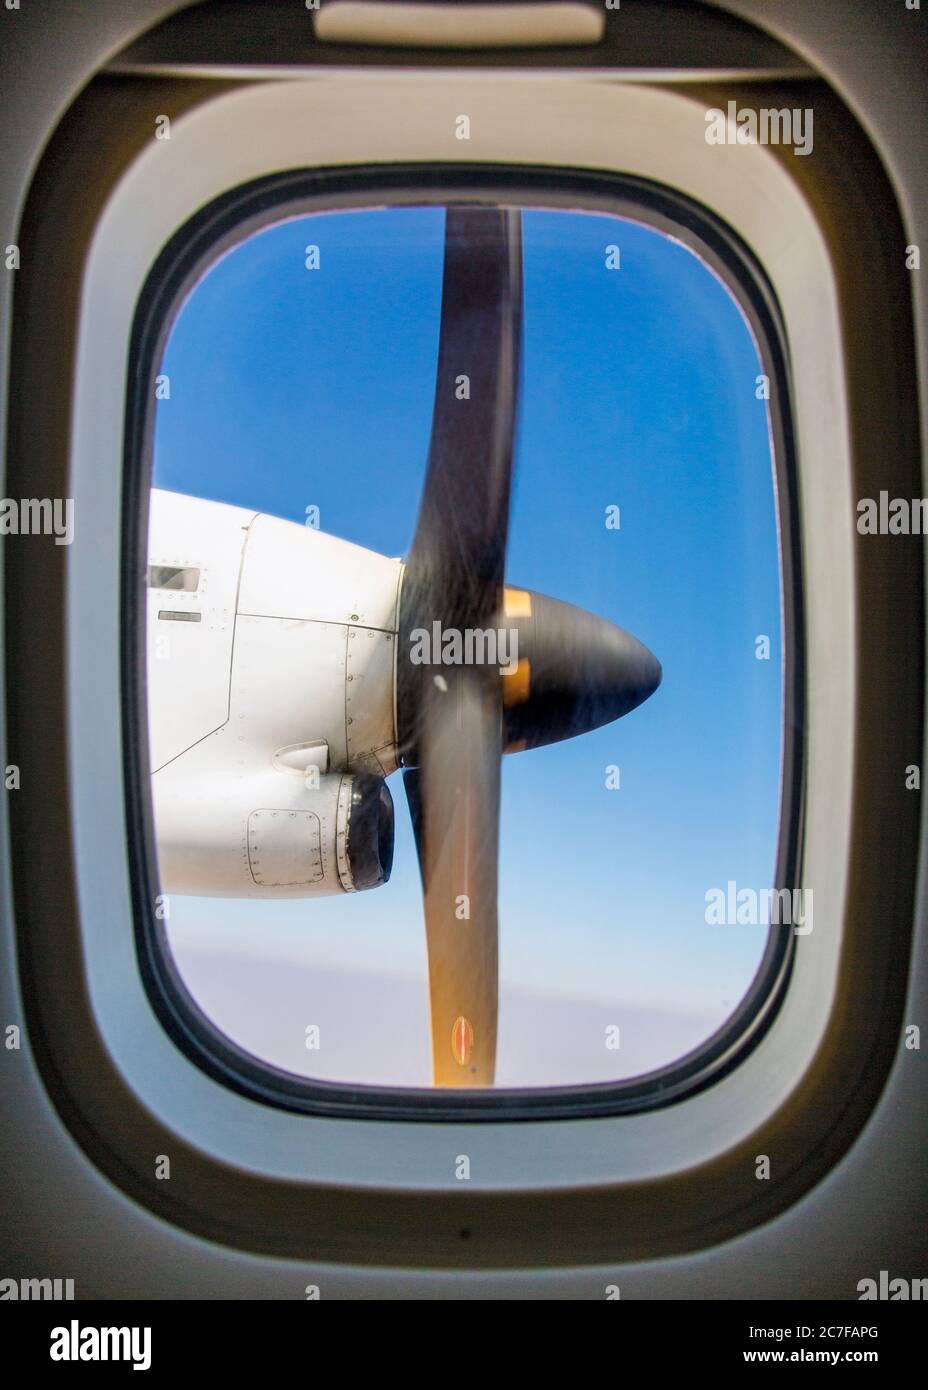 View through an airplane window of the propeller engine Stock Photo